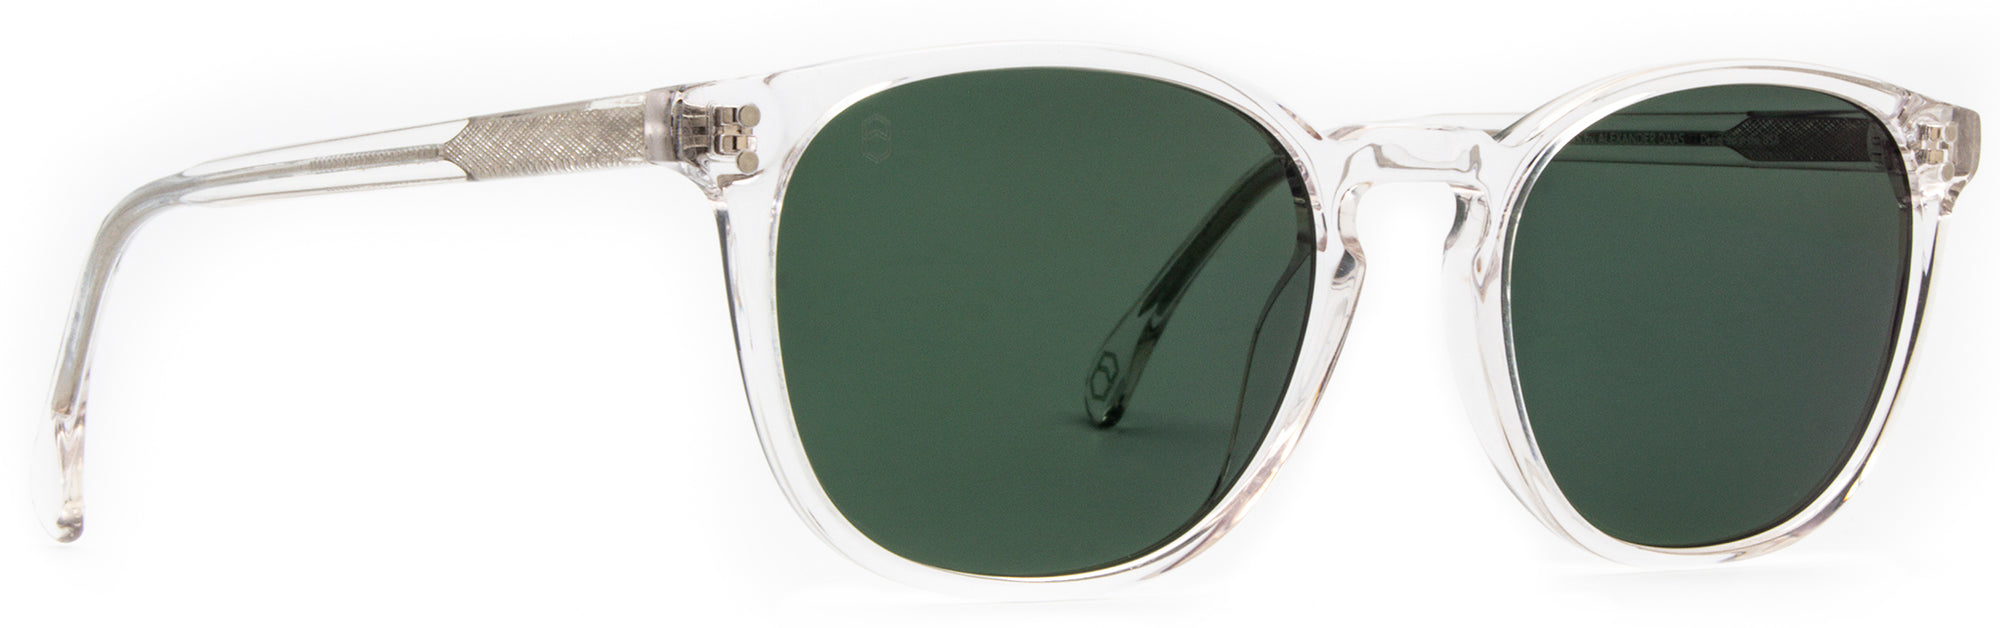 Alexander Daas - Milan Sunglasses 51 C5 Crystal with G15 Polarized Lenses - Side View